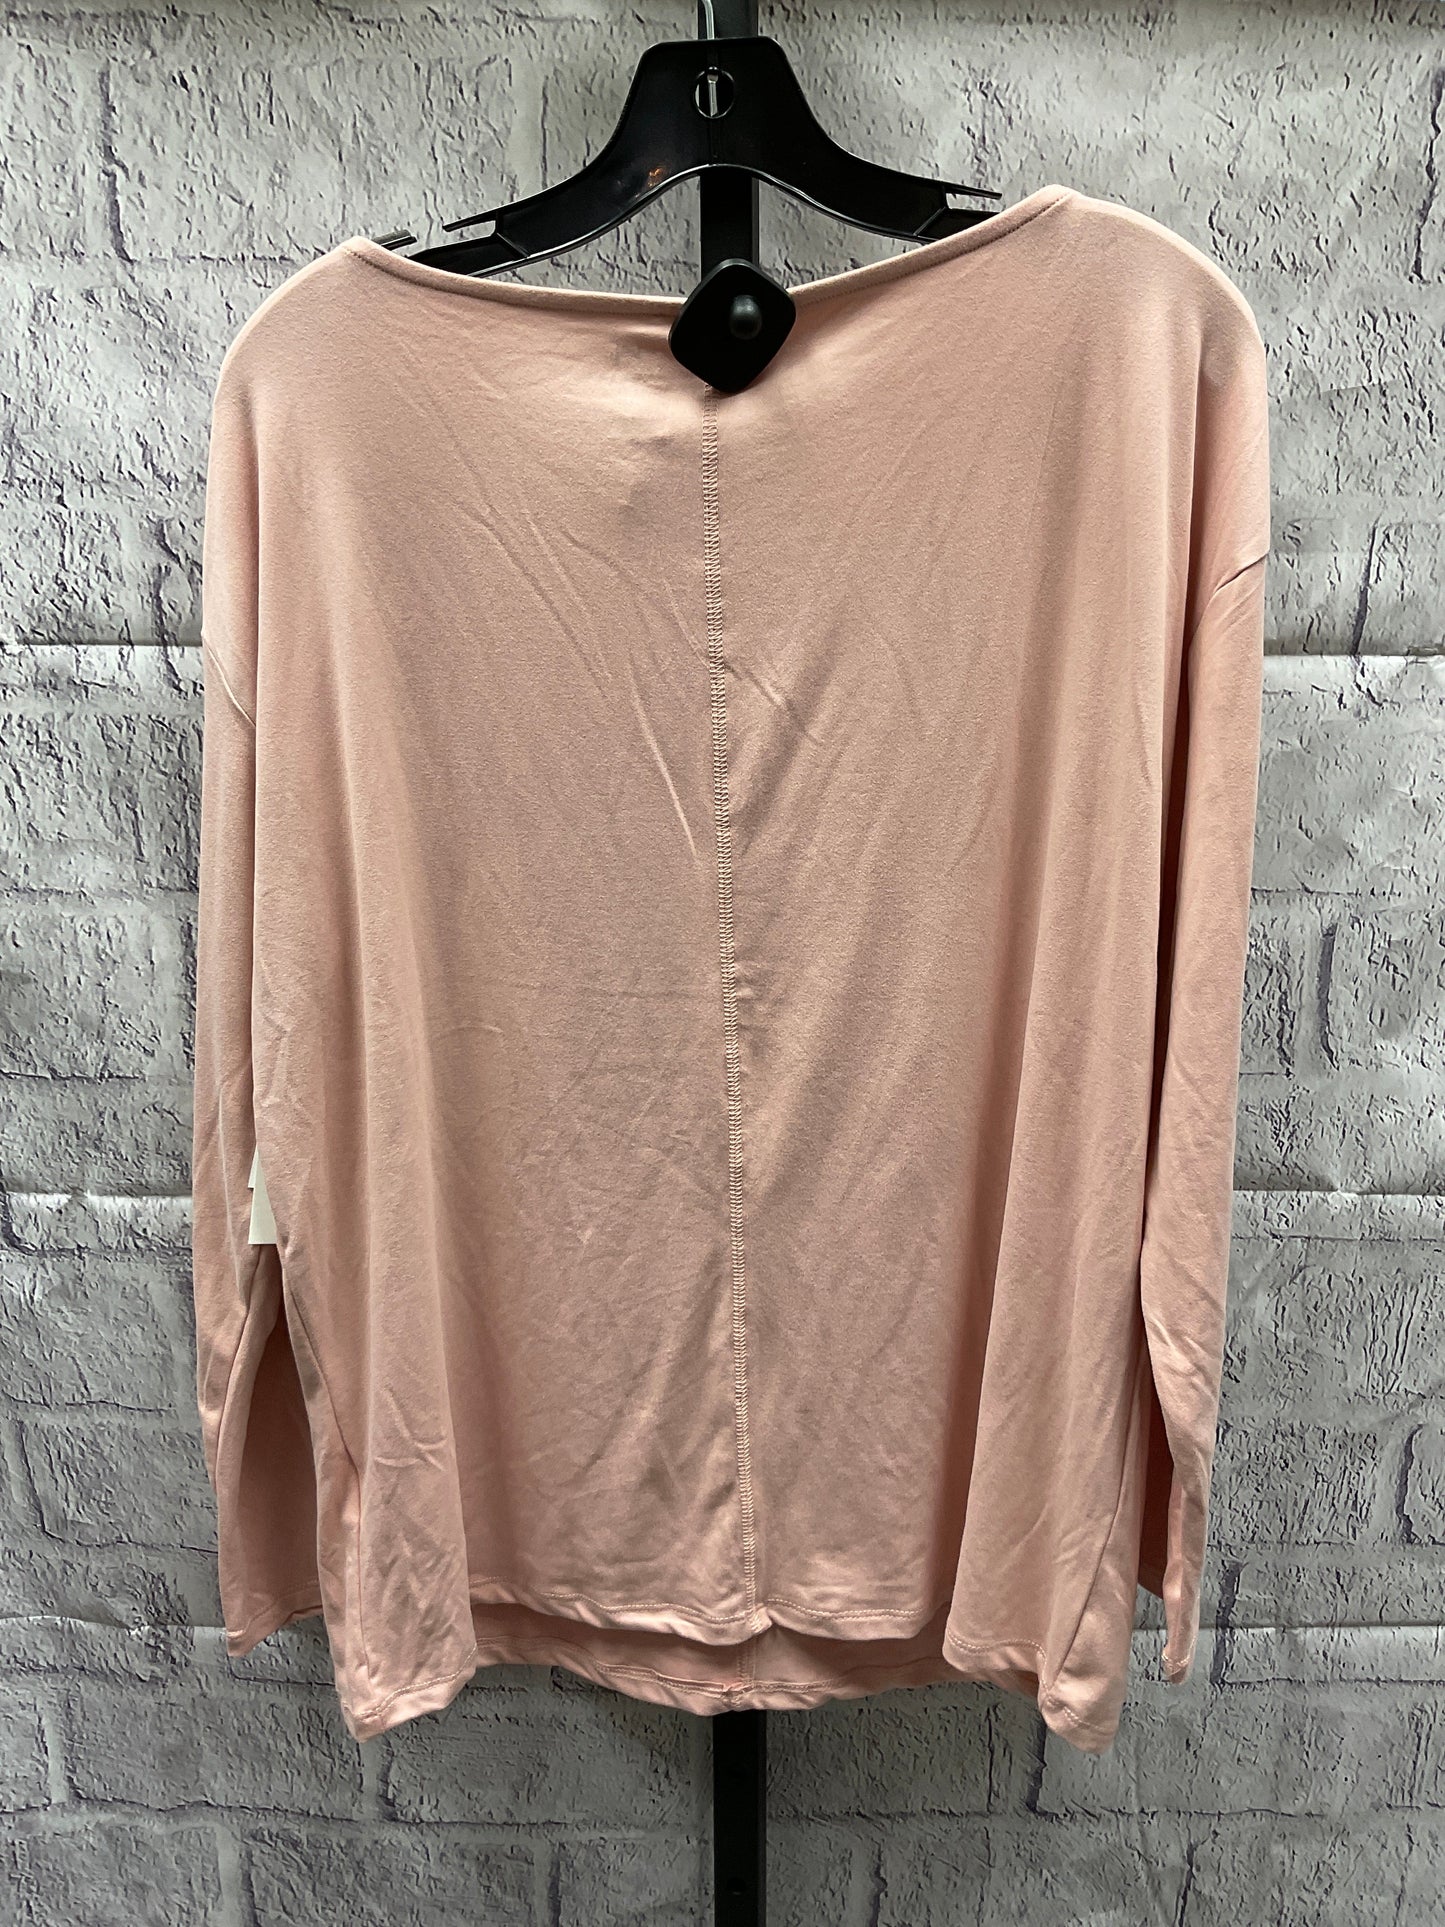 Athletic Top Long Sleeve Collar By Halston  Size: S